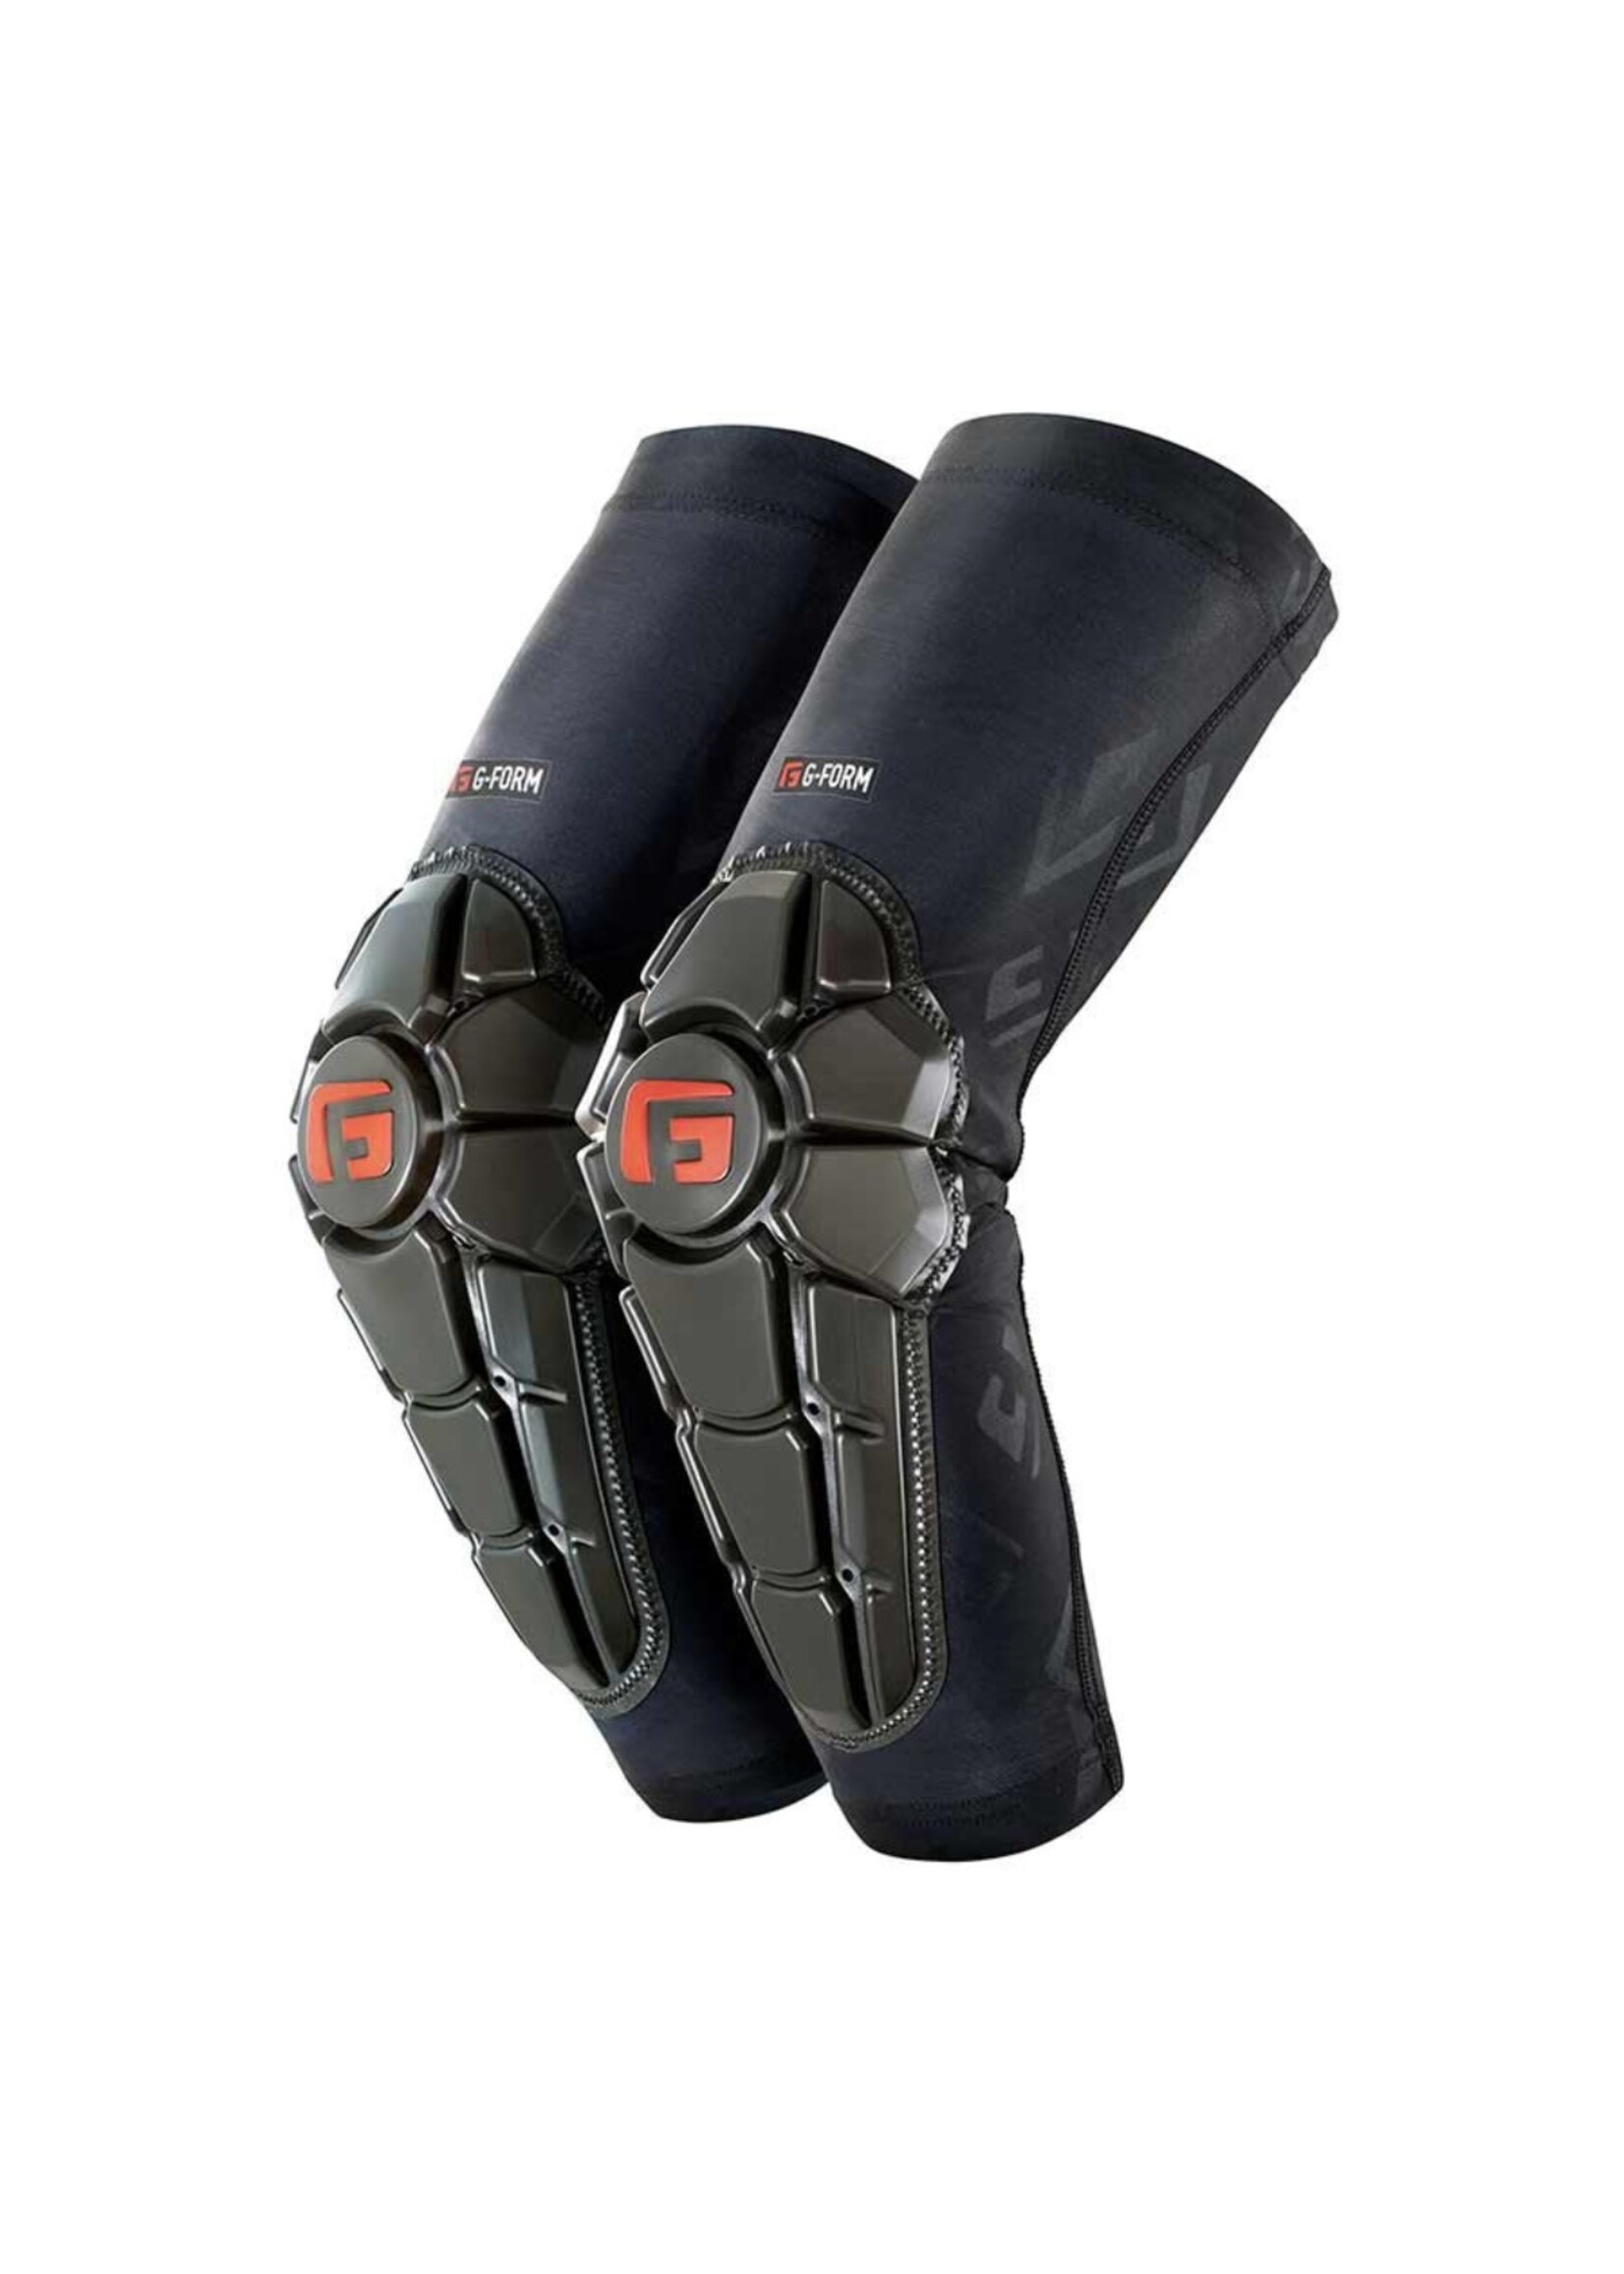 G-FORM PRO-X ELBOW PADS YOUTH